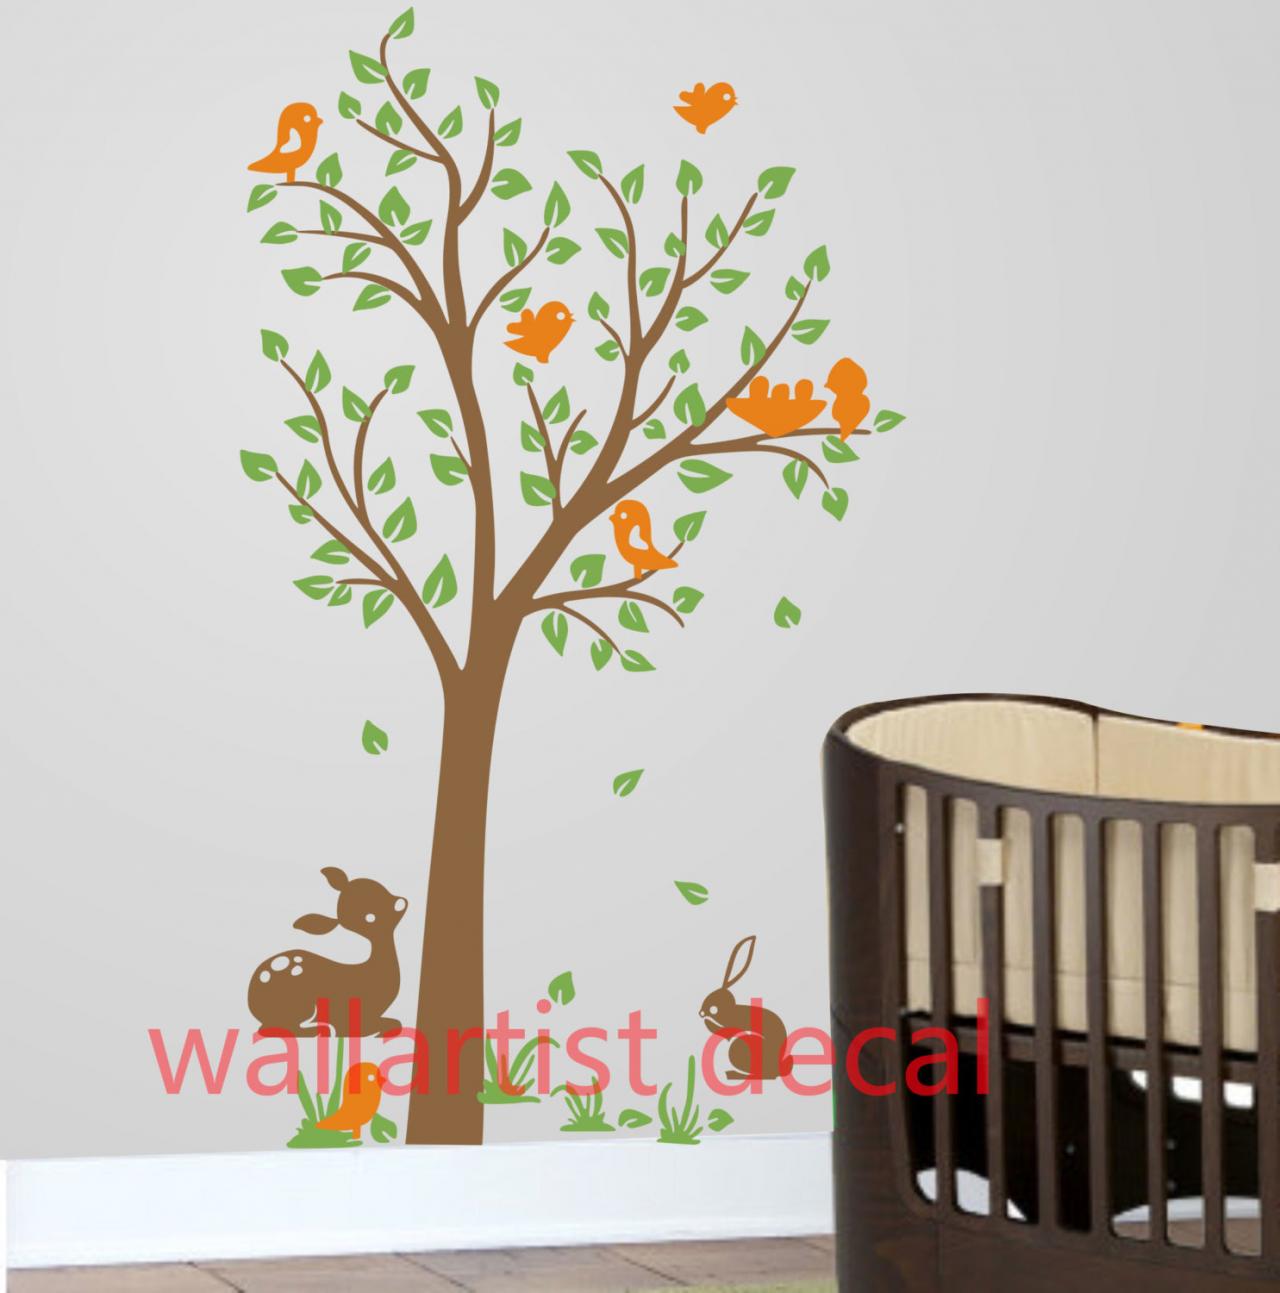 Vinyl Wall Decal Cute Bunny Fawn Under Tree Bird Nest Birds Deer Home Art Decals Wall Sticker Stickers Kids Room Bed Baby Removable Kid R606